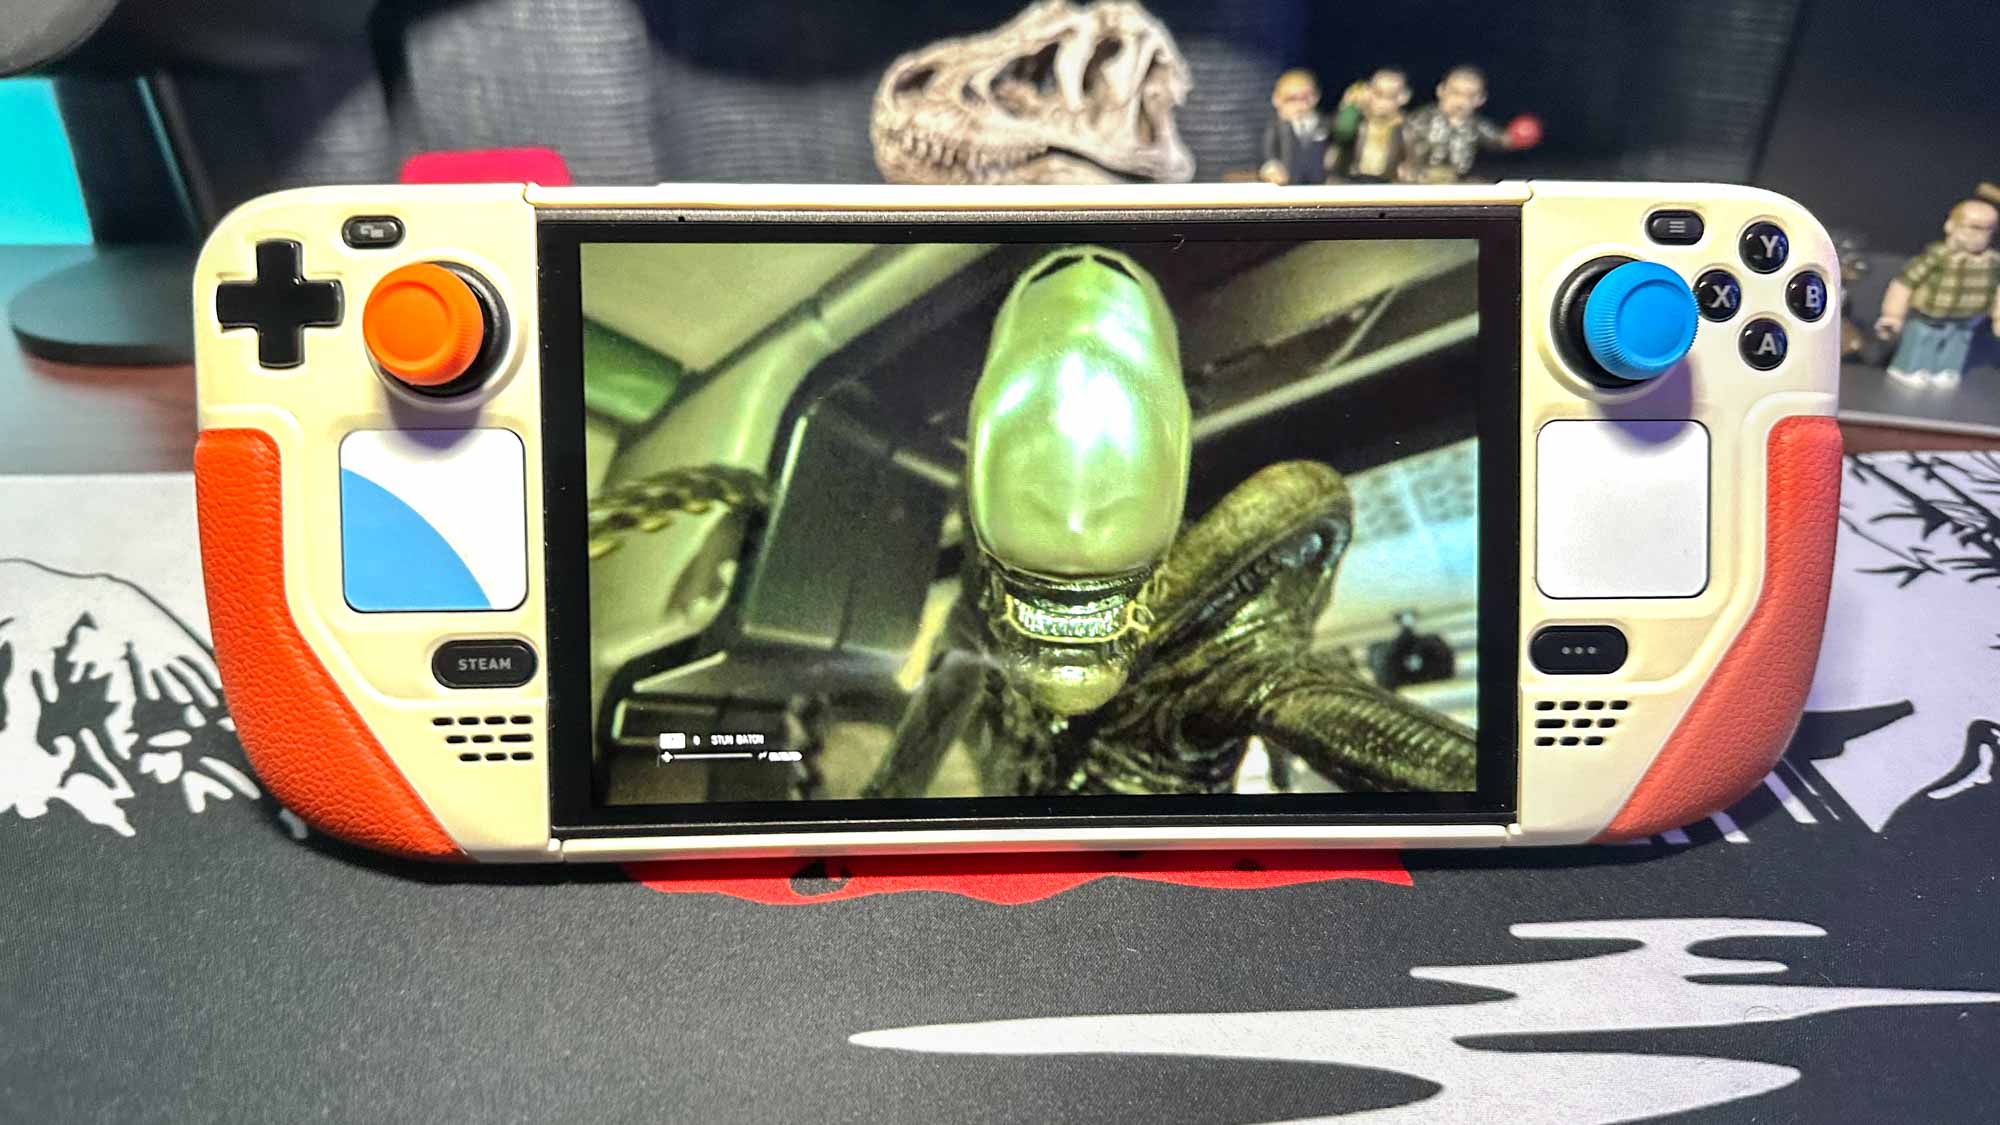 New handheld consoles are turning gamers into hardware agnostics